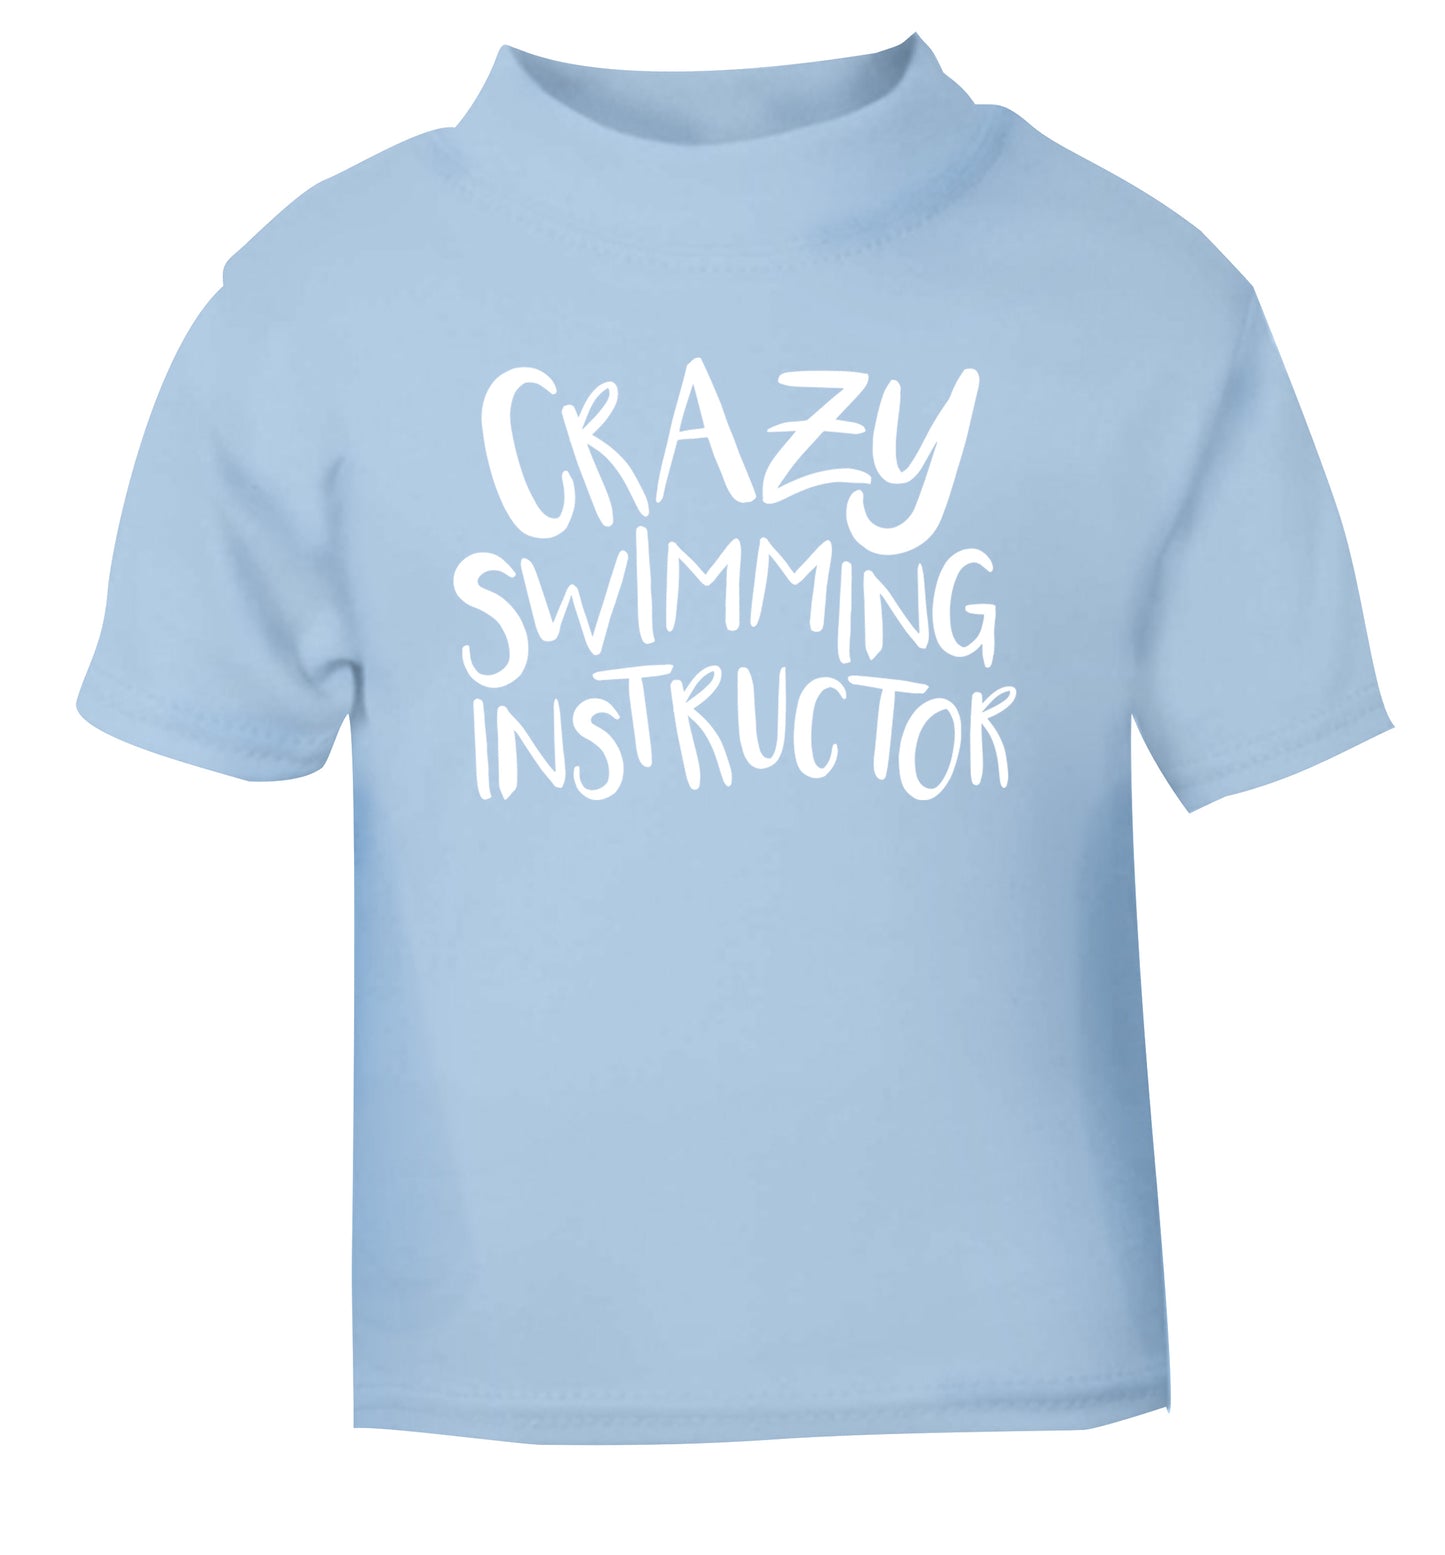 Crazy swimming instructor light blue Baby Toddler Tshirt 2 Years